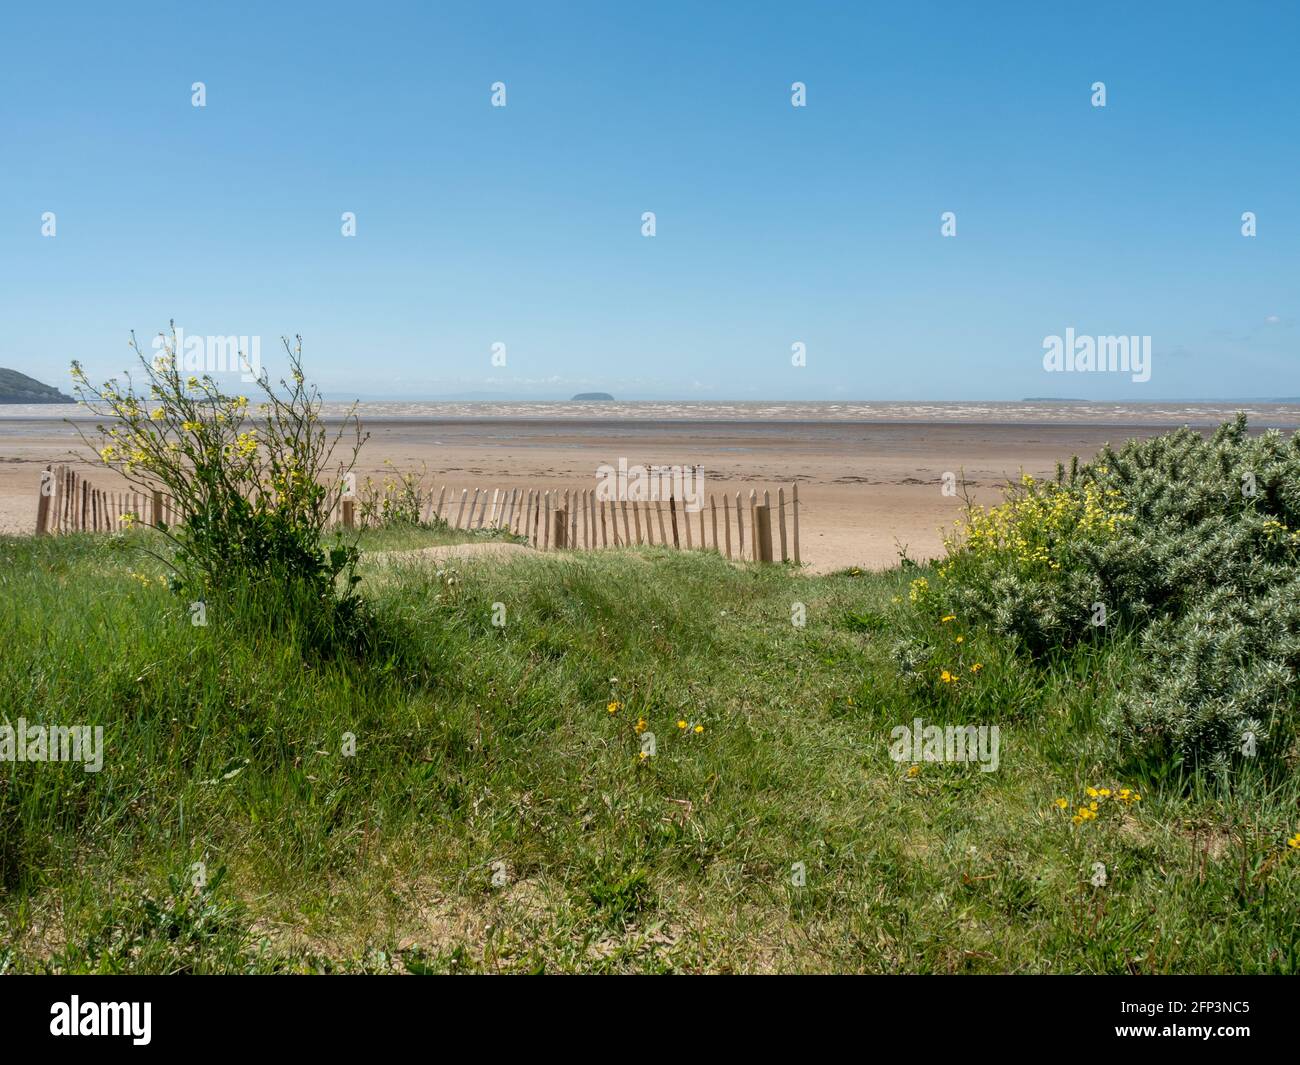 A plant on a sand dune looking across Sand Bay, near Weston-super-Mare, in North Somerset. Stock Photo